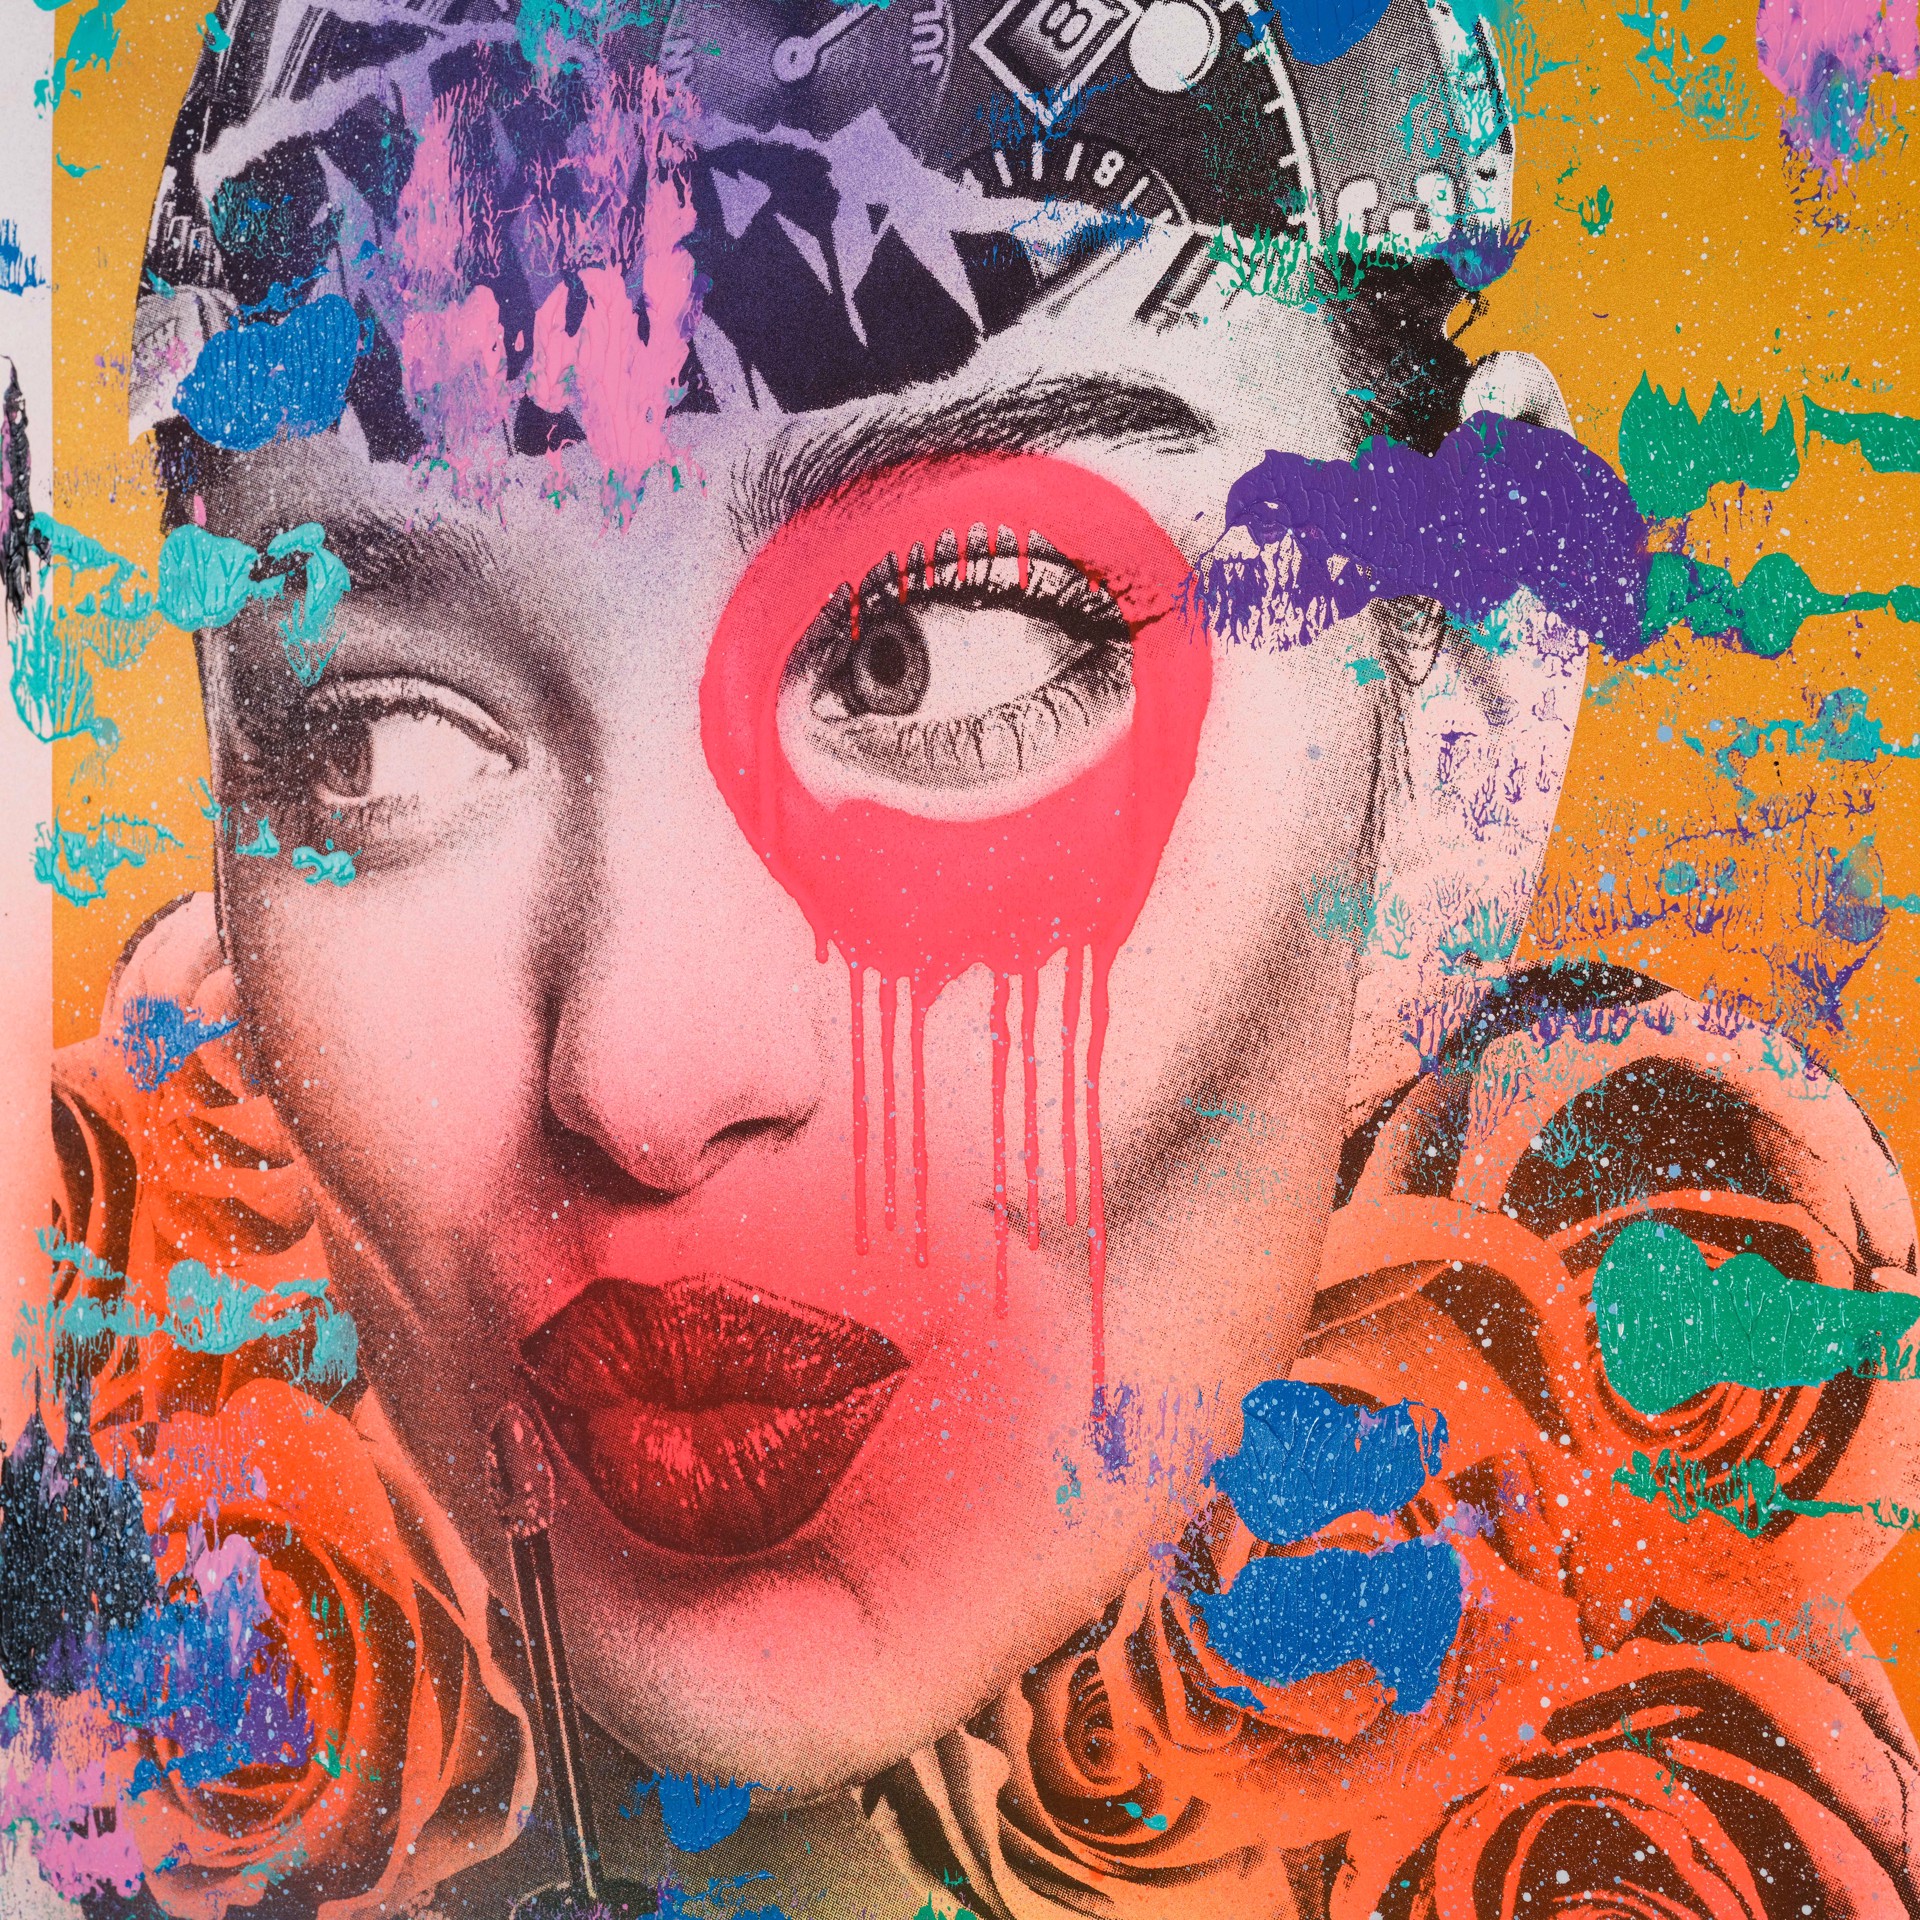 Untitled 2 by DAIN